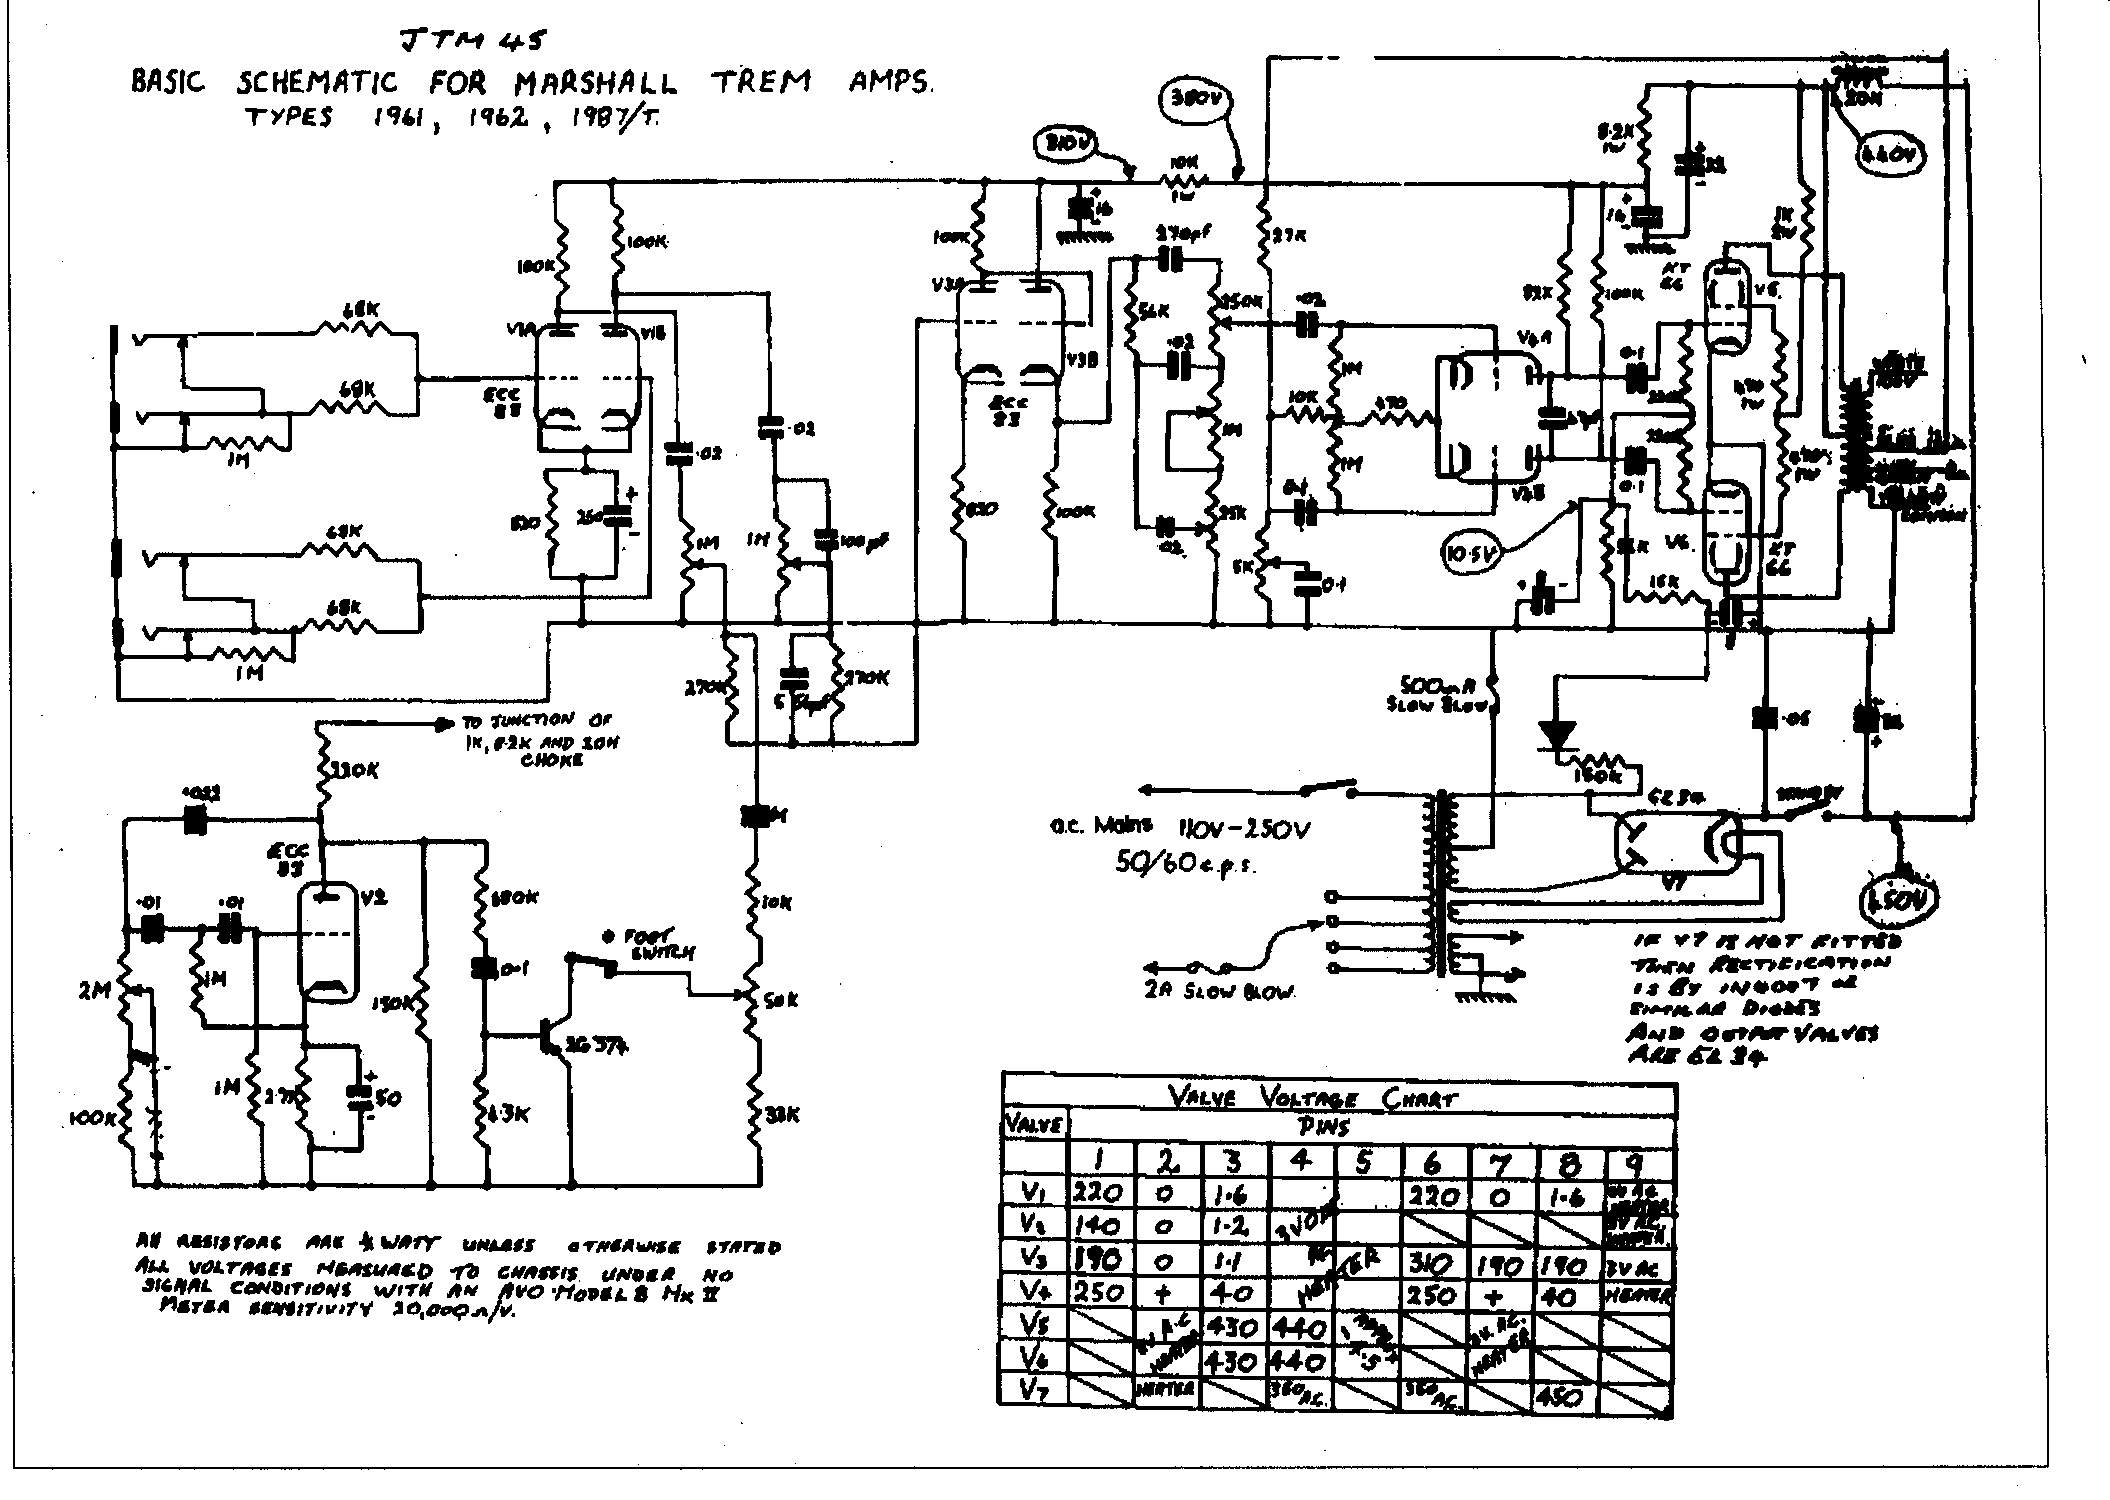 Jtm45 Schematic And Layout